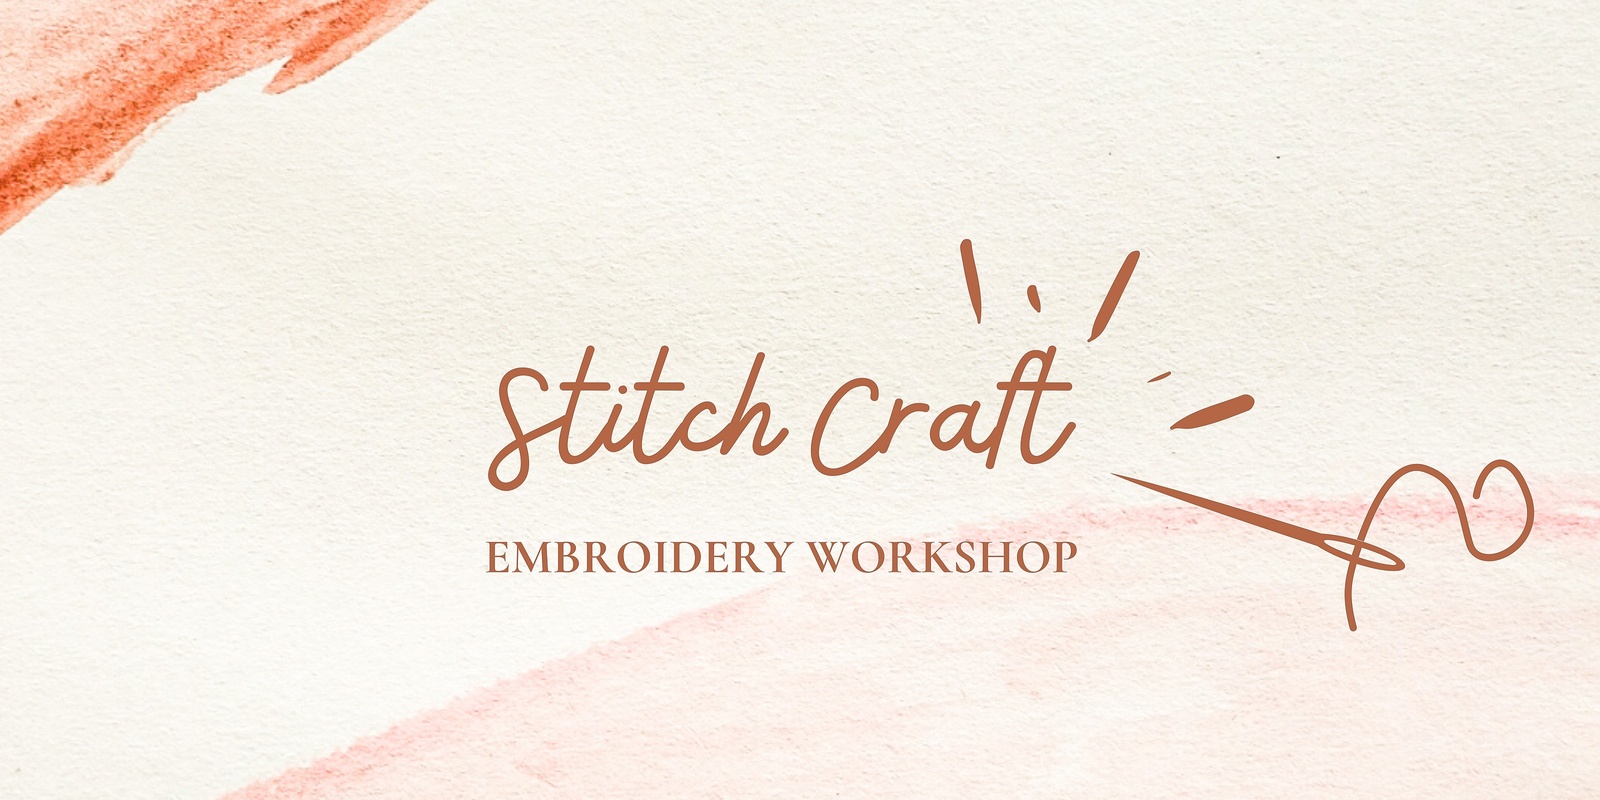 Banner image for STITCH CRAFT